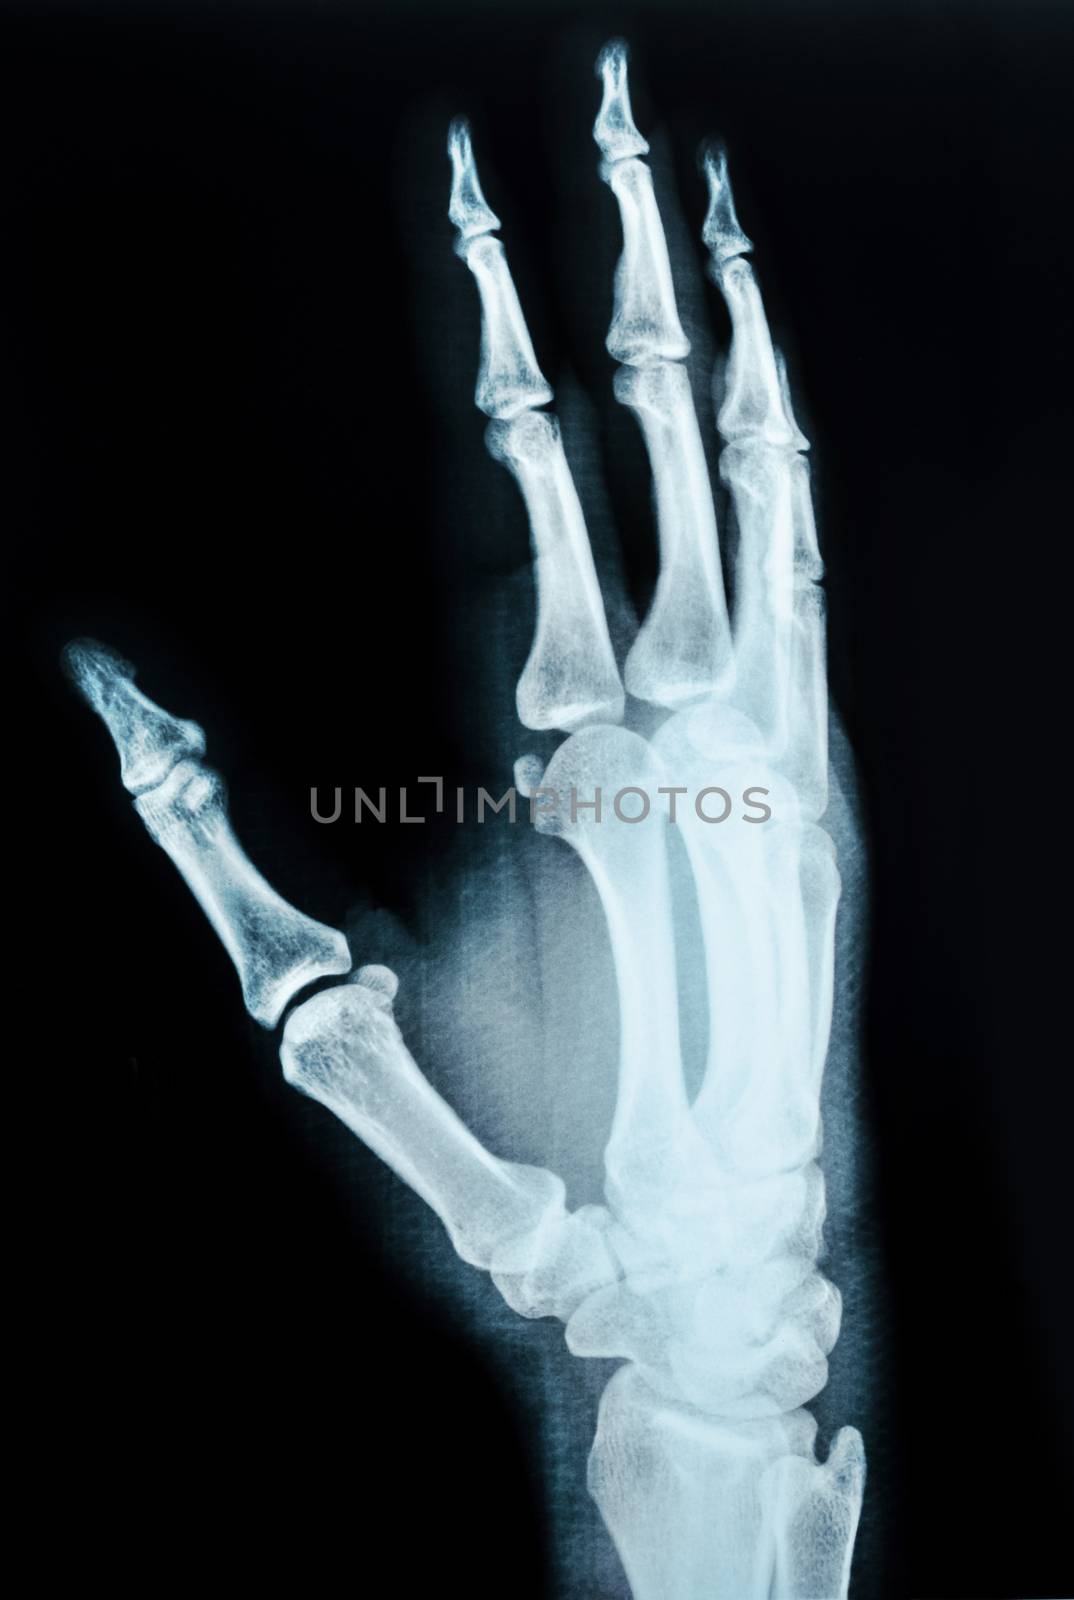 x-ray picture of human hands. by Gamjai